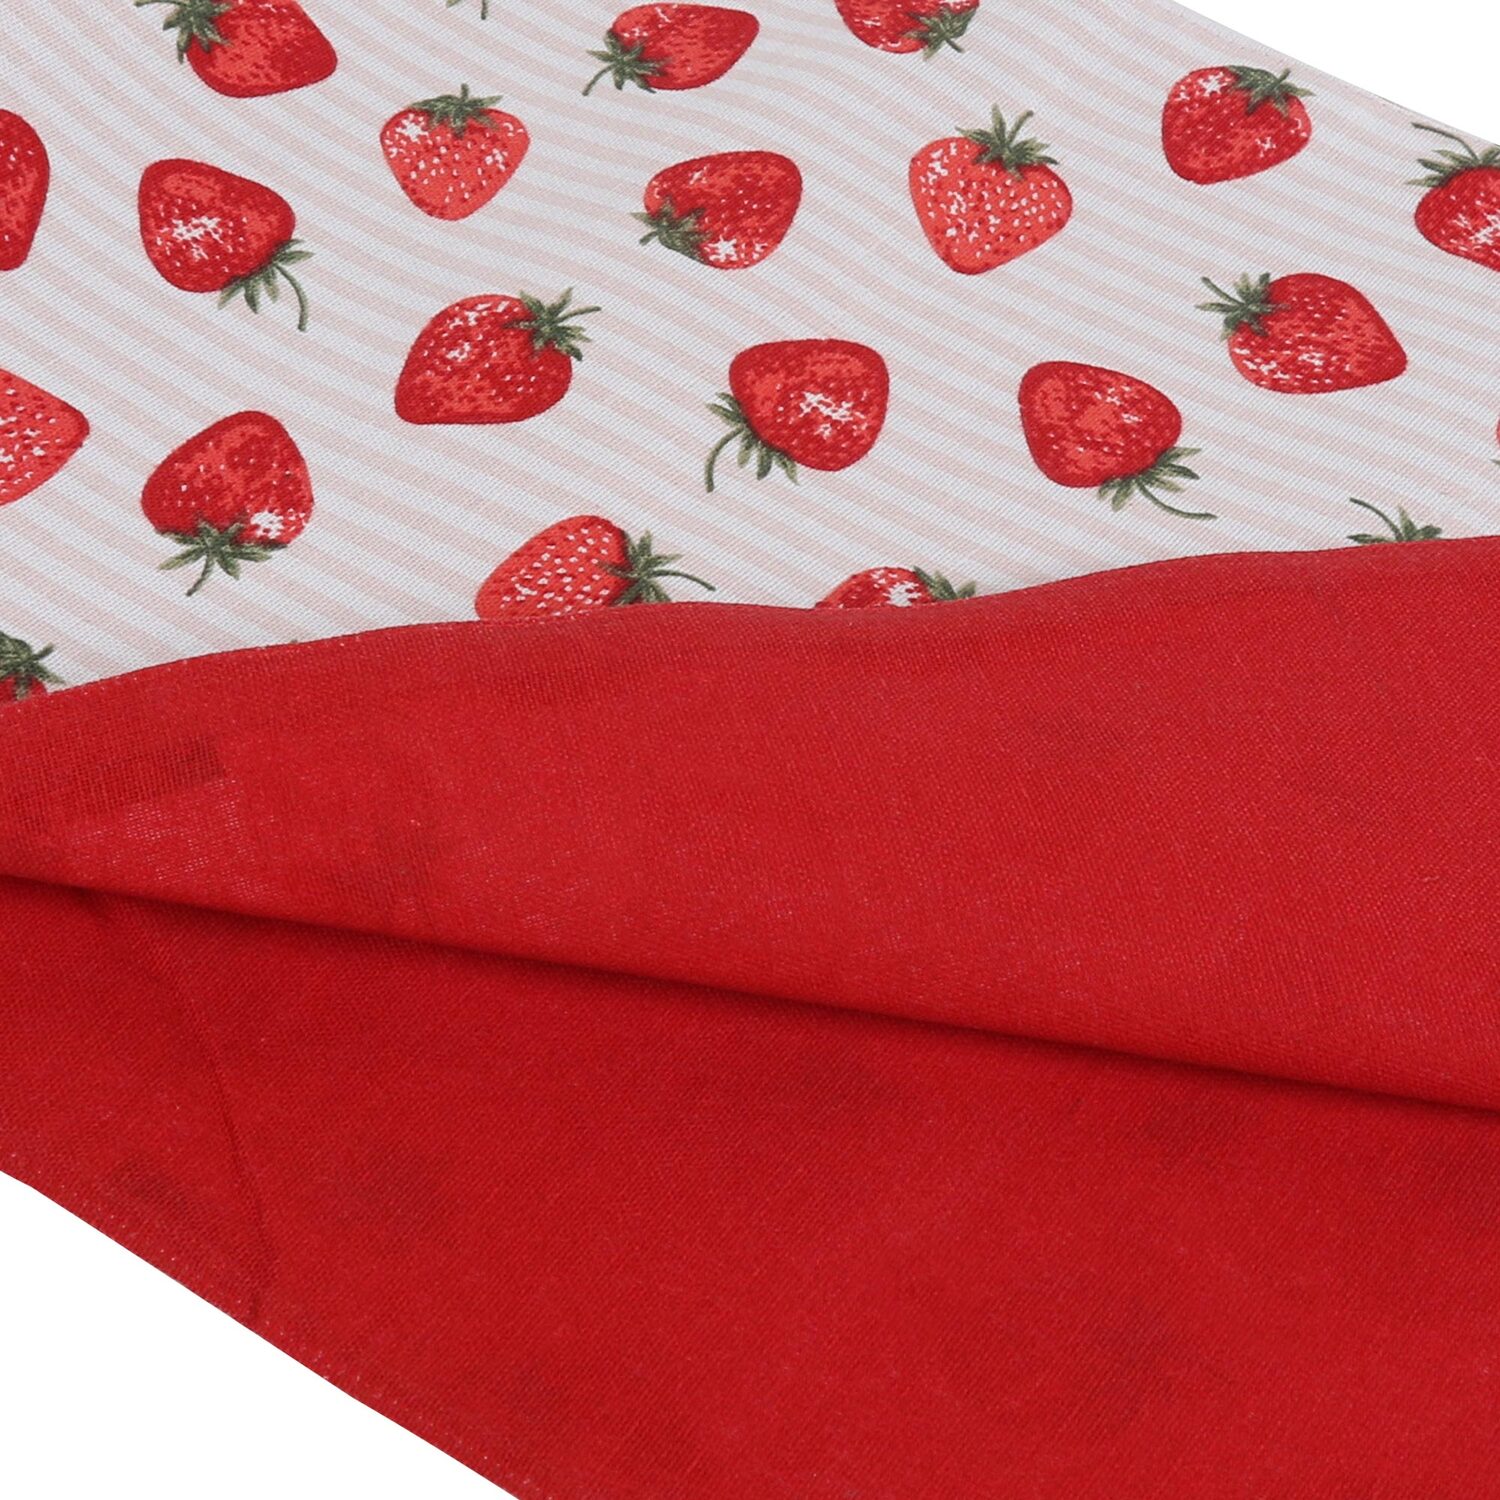 Strawberry Table Runner - Red Image 2